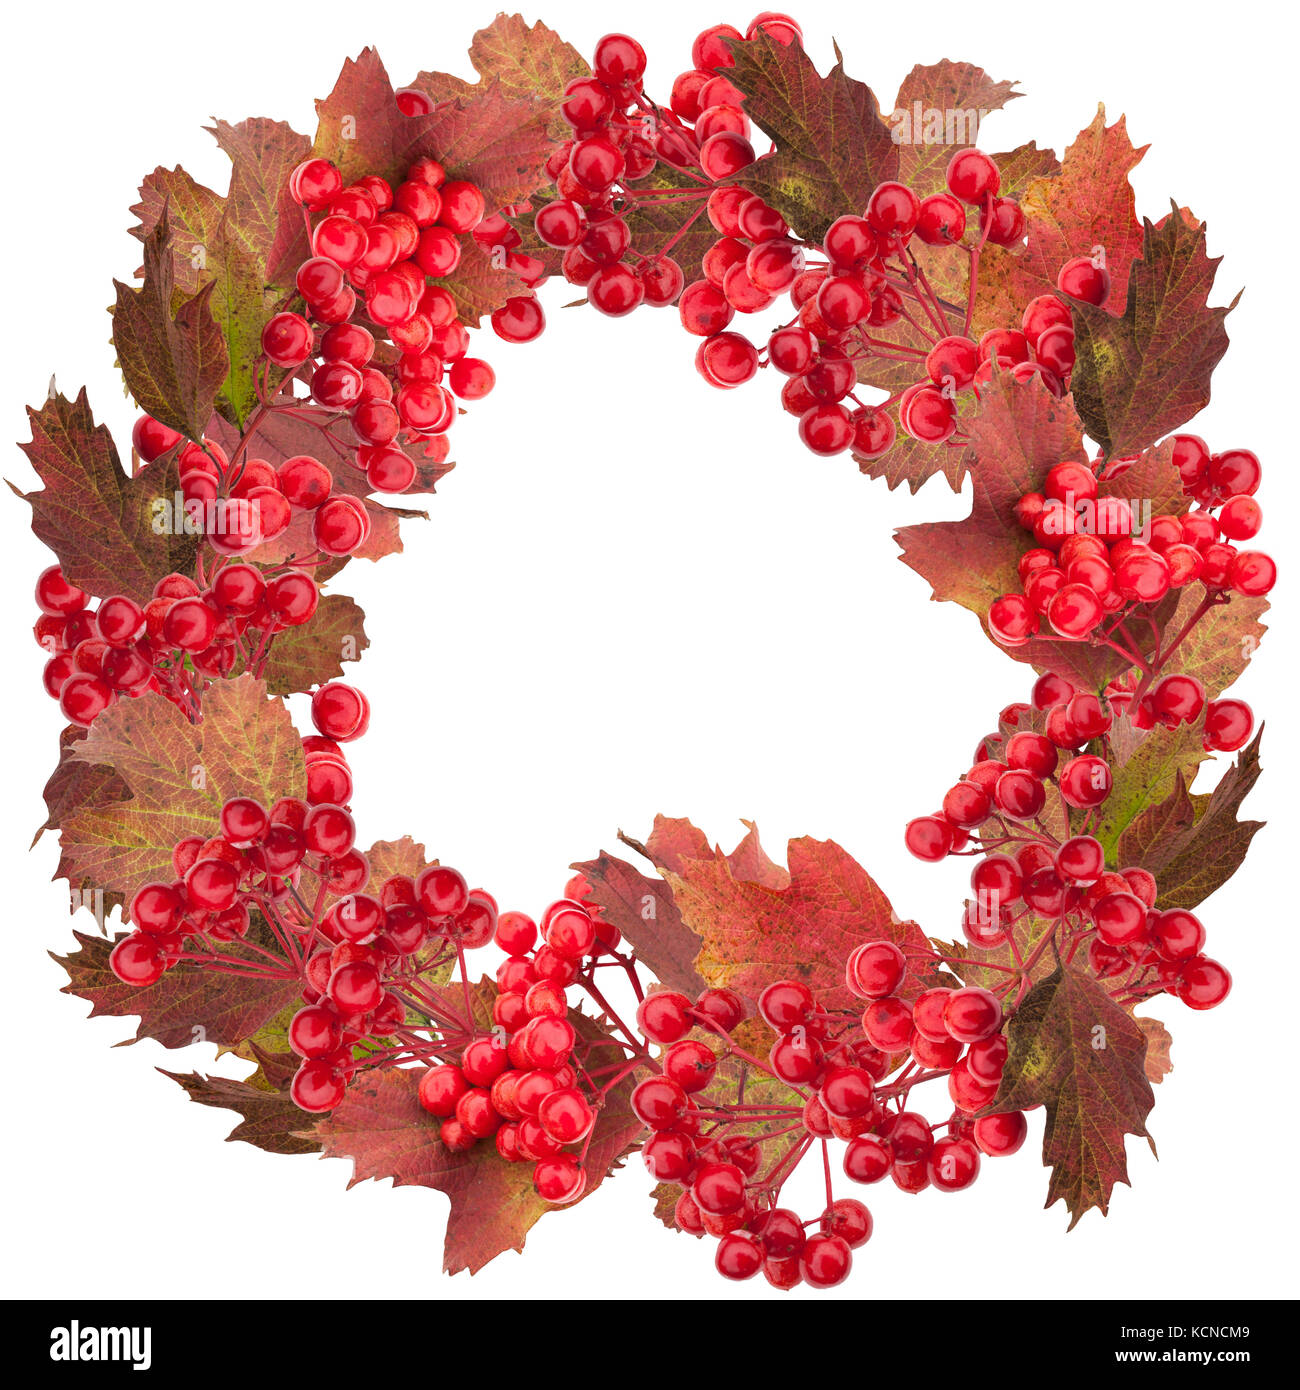 Red snowball tree berry wreath isolated on white Stock Photo